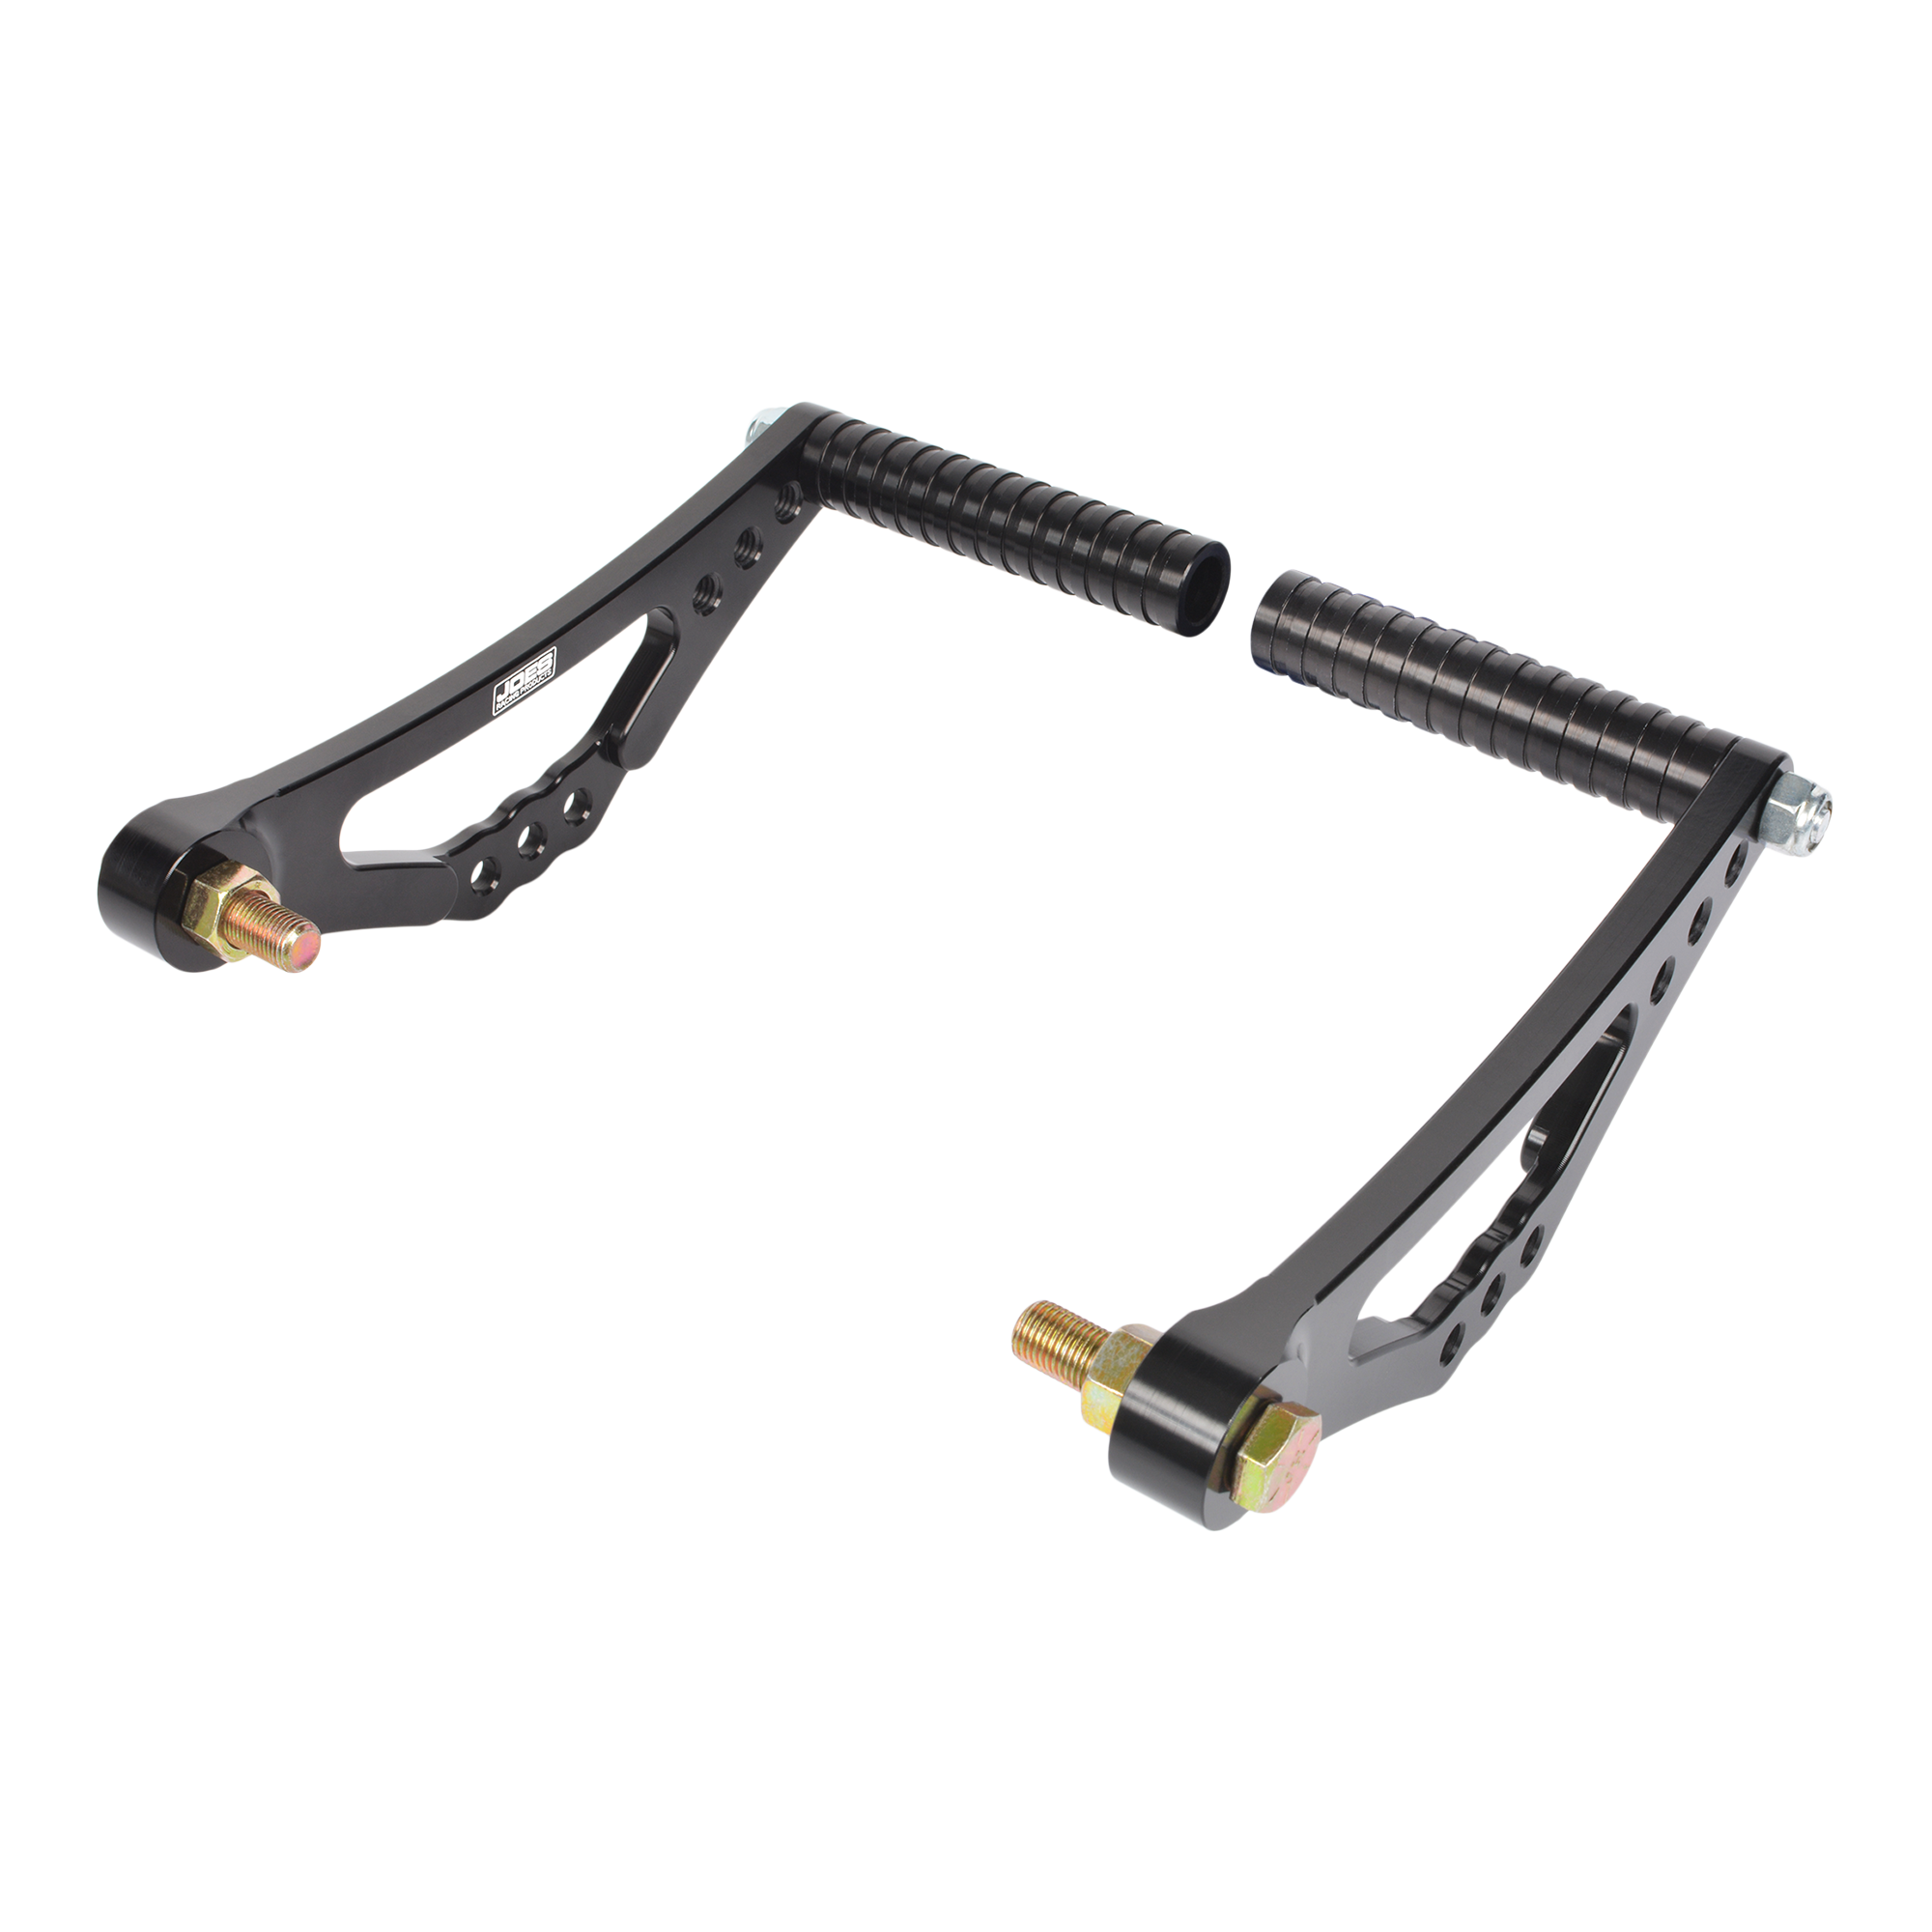 JOES Micro/Kart/Small Car Pedals - JOES Racing Products